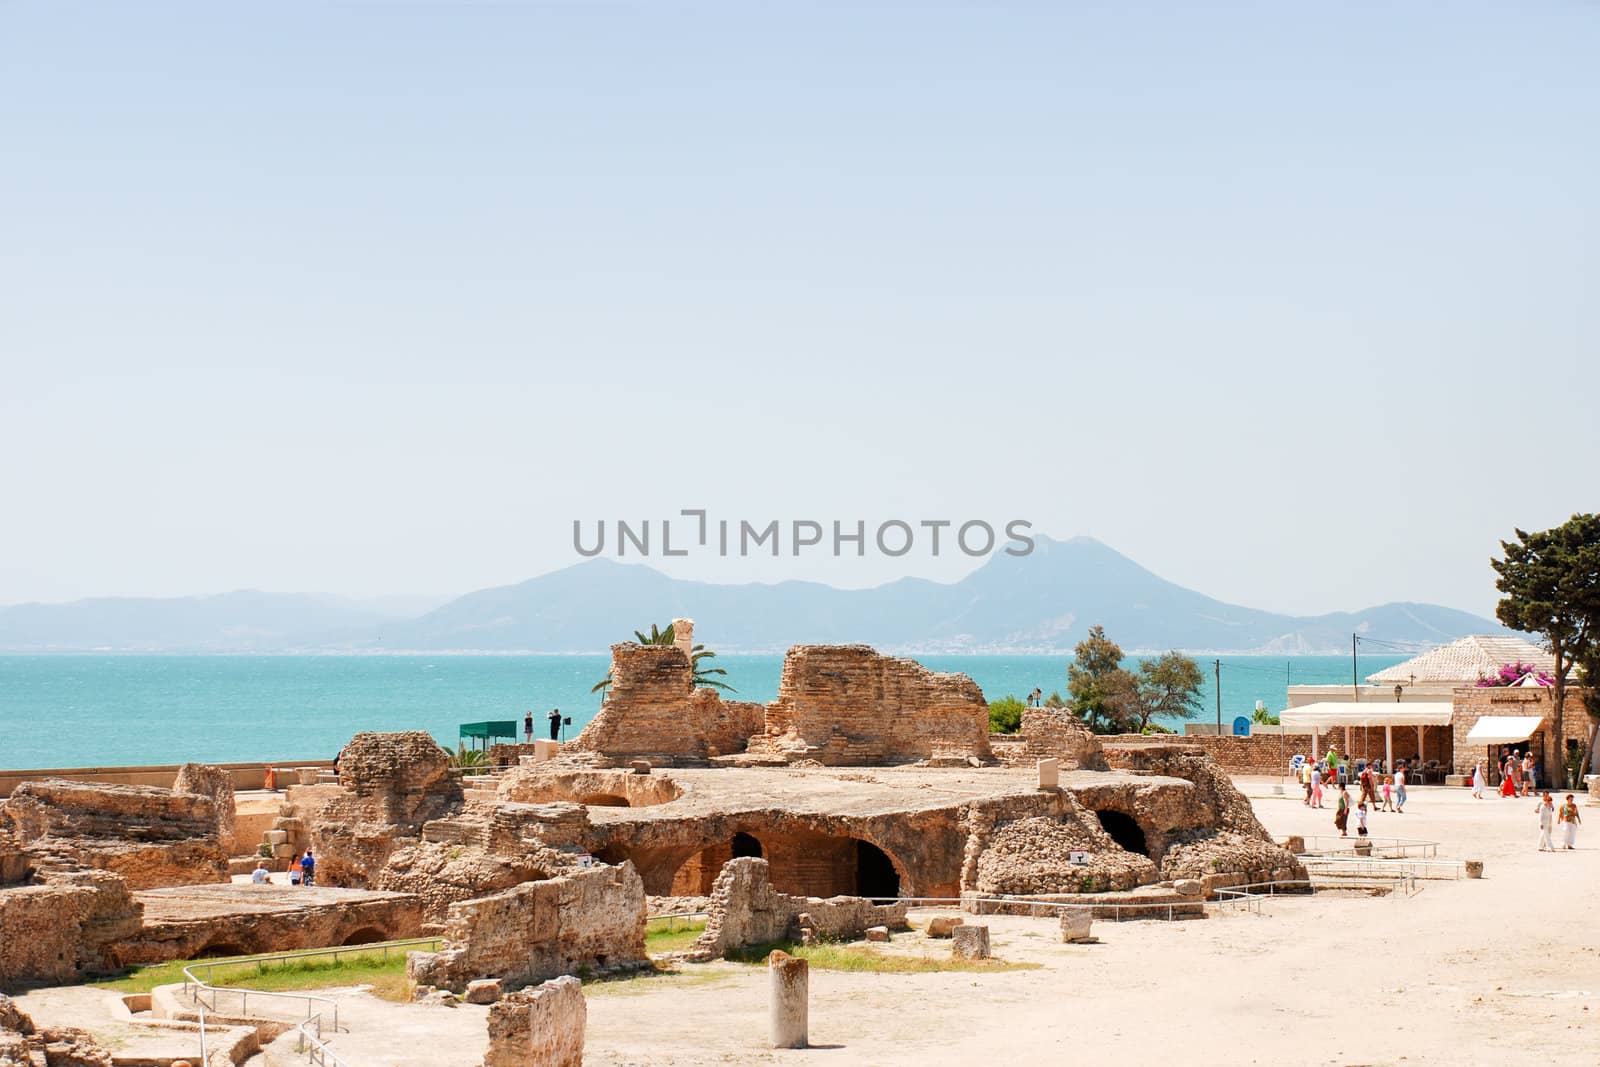 Ruins of the Carthage, Tunisia by y_serge